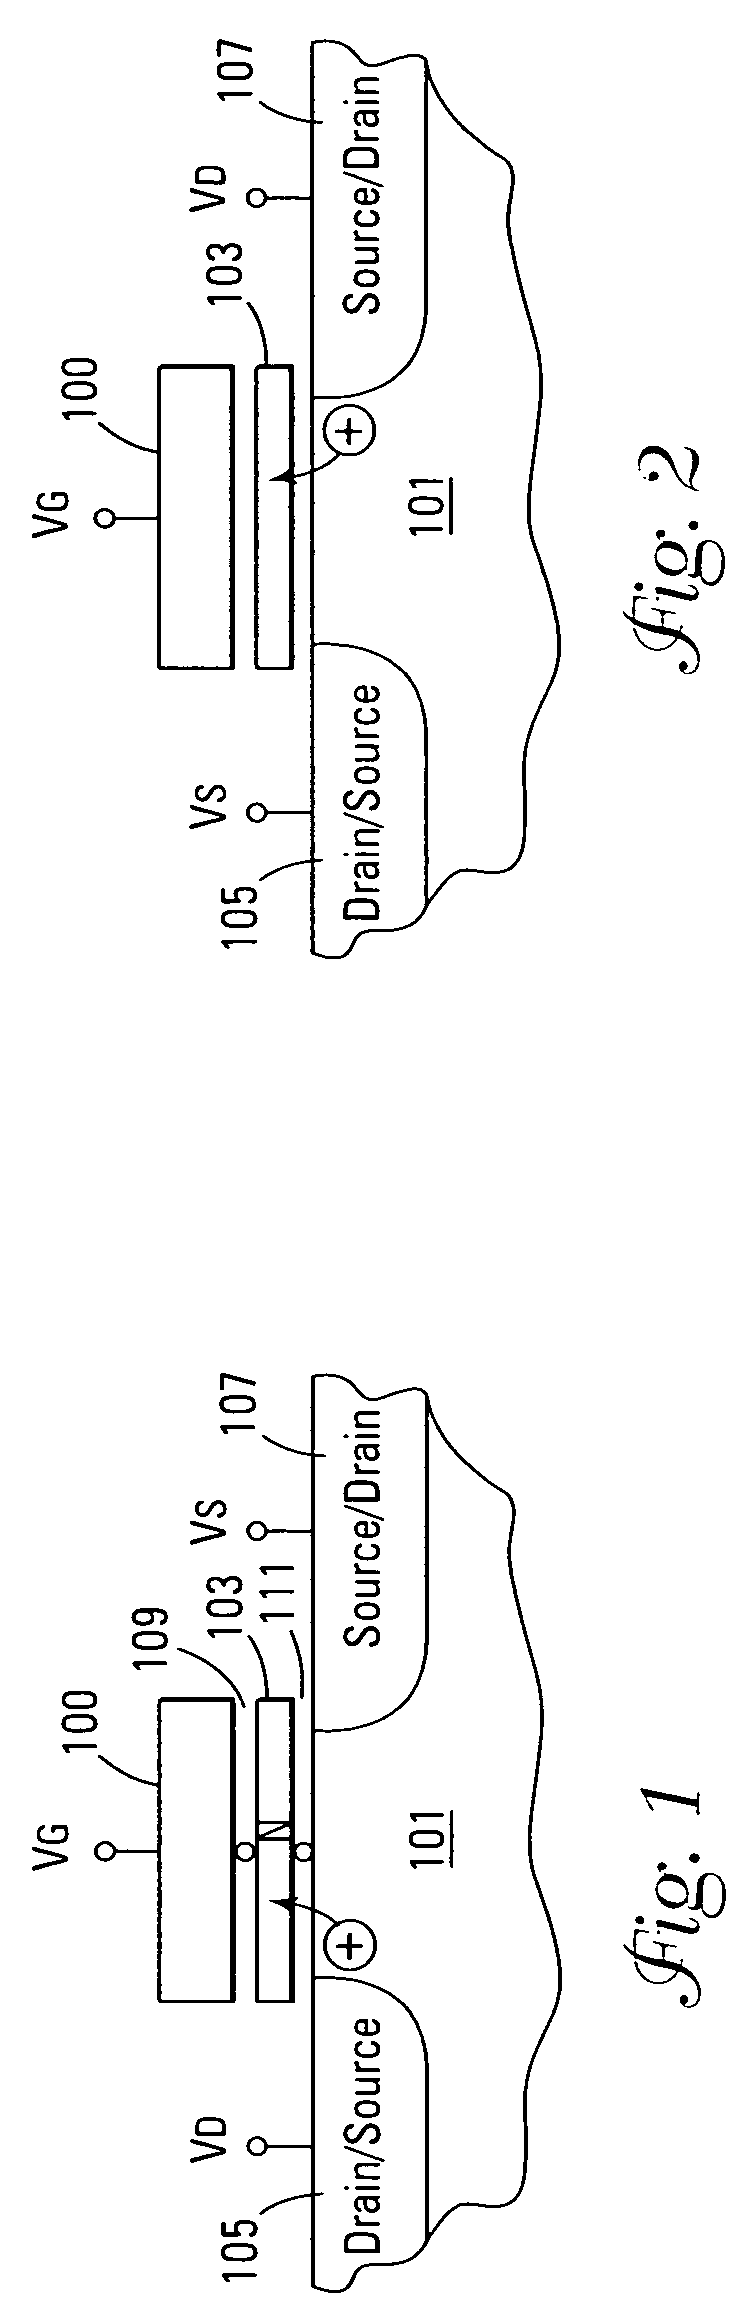 Multi-state memory cell with asymmetric charge trapping